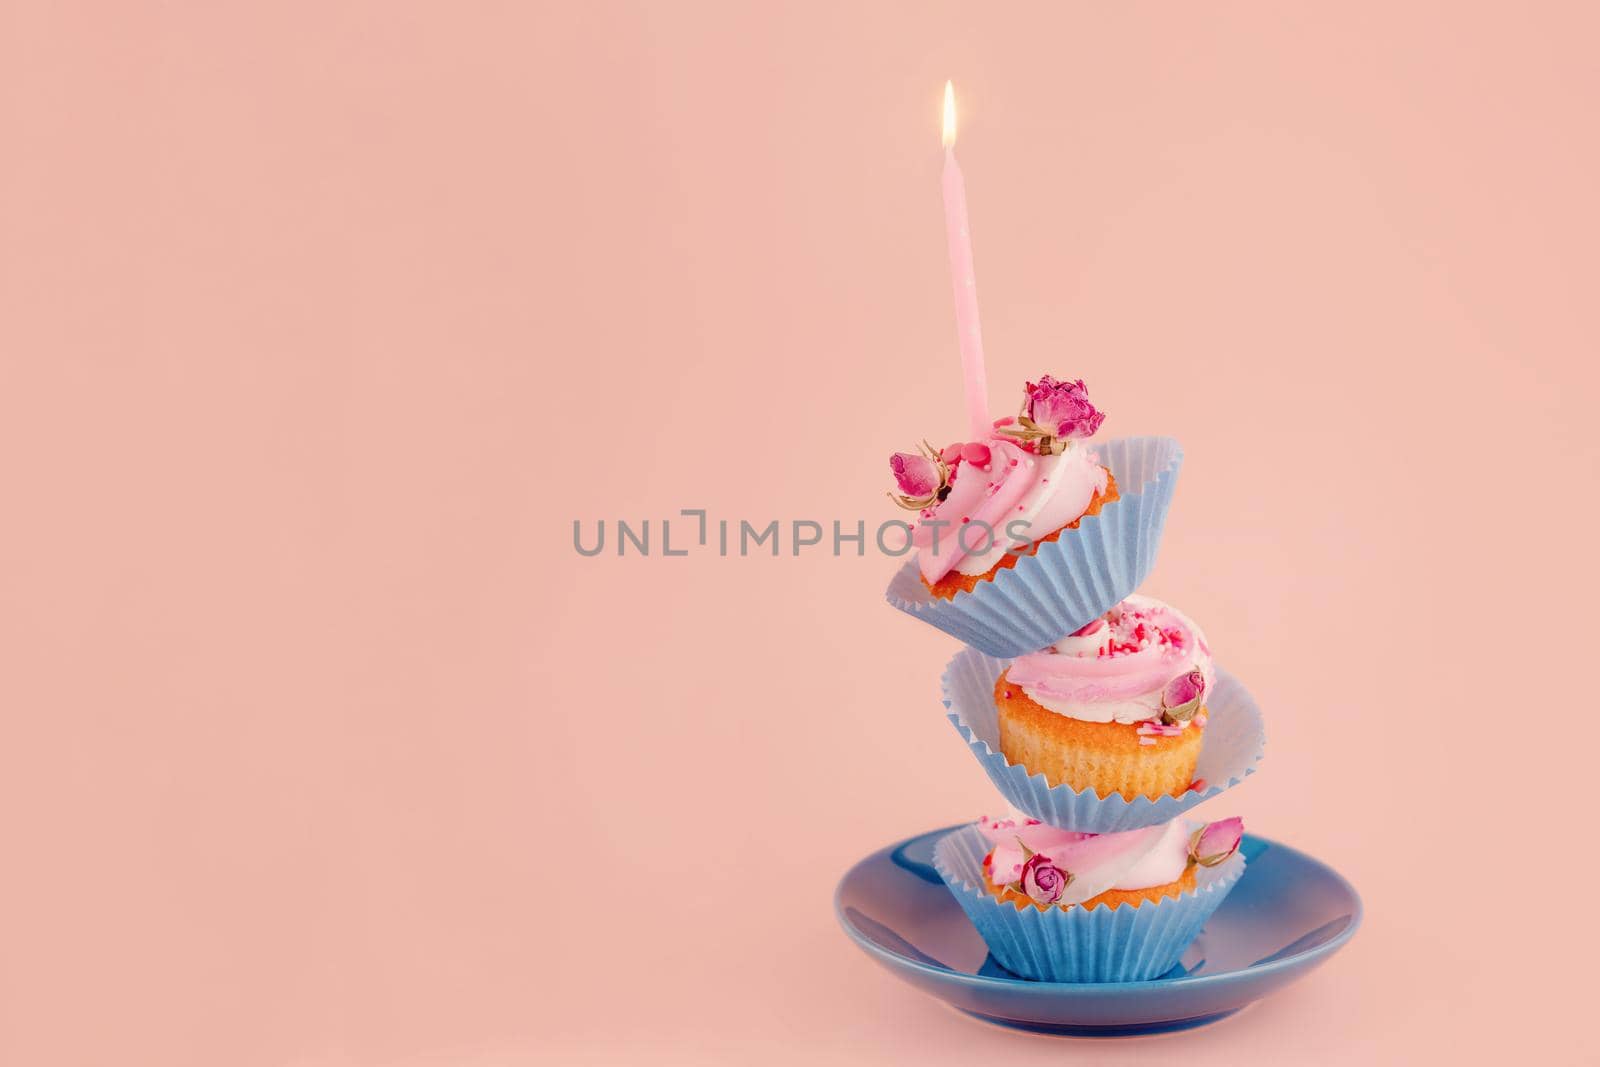 three birthday berry muffins on top of each other in blue wrappers with a candle on top on a saucer on a pink background. high-quality photos for calendar and cards. Space for text